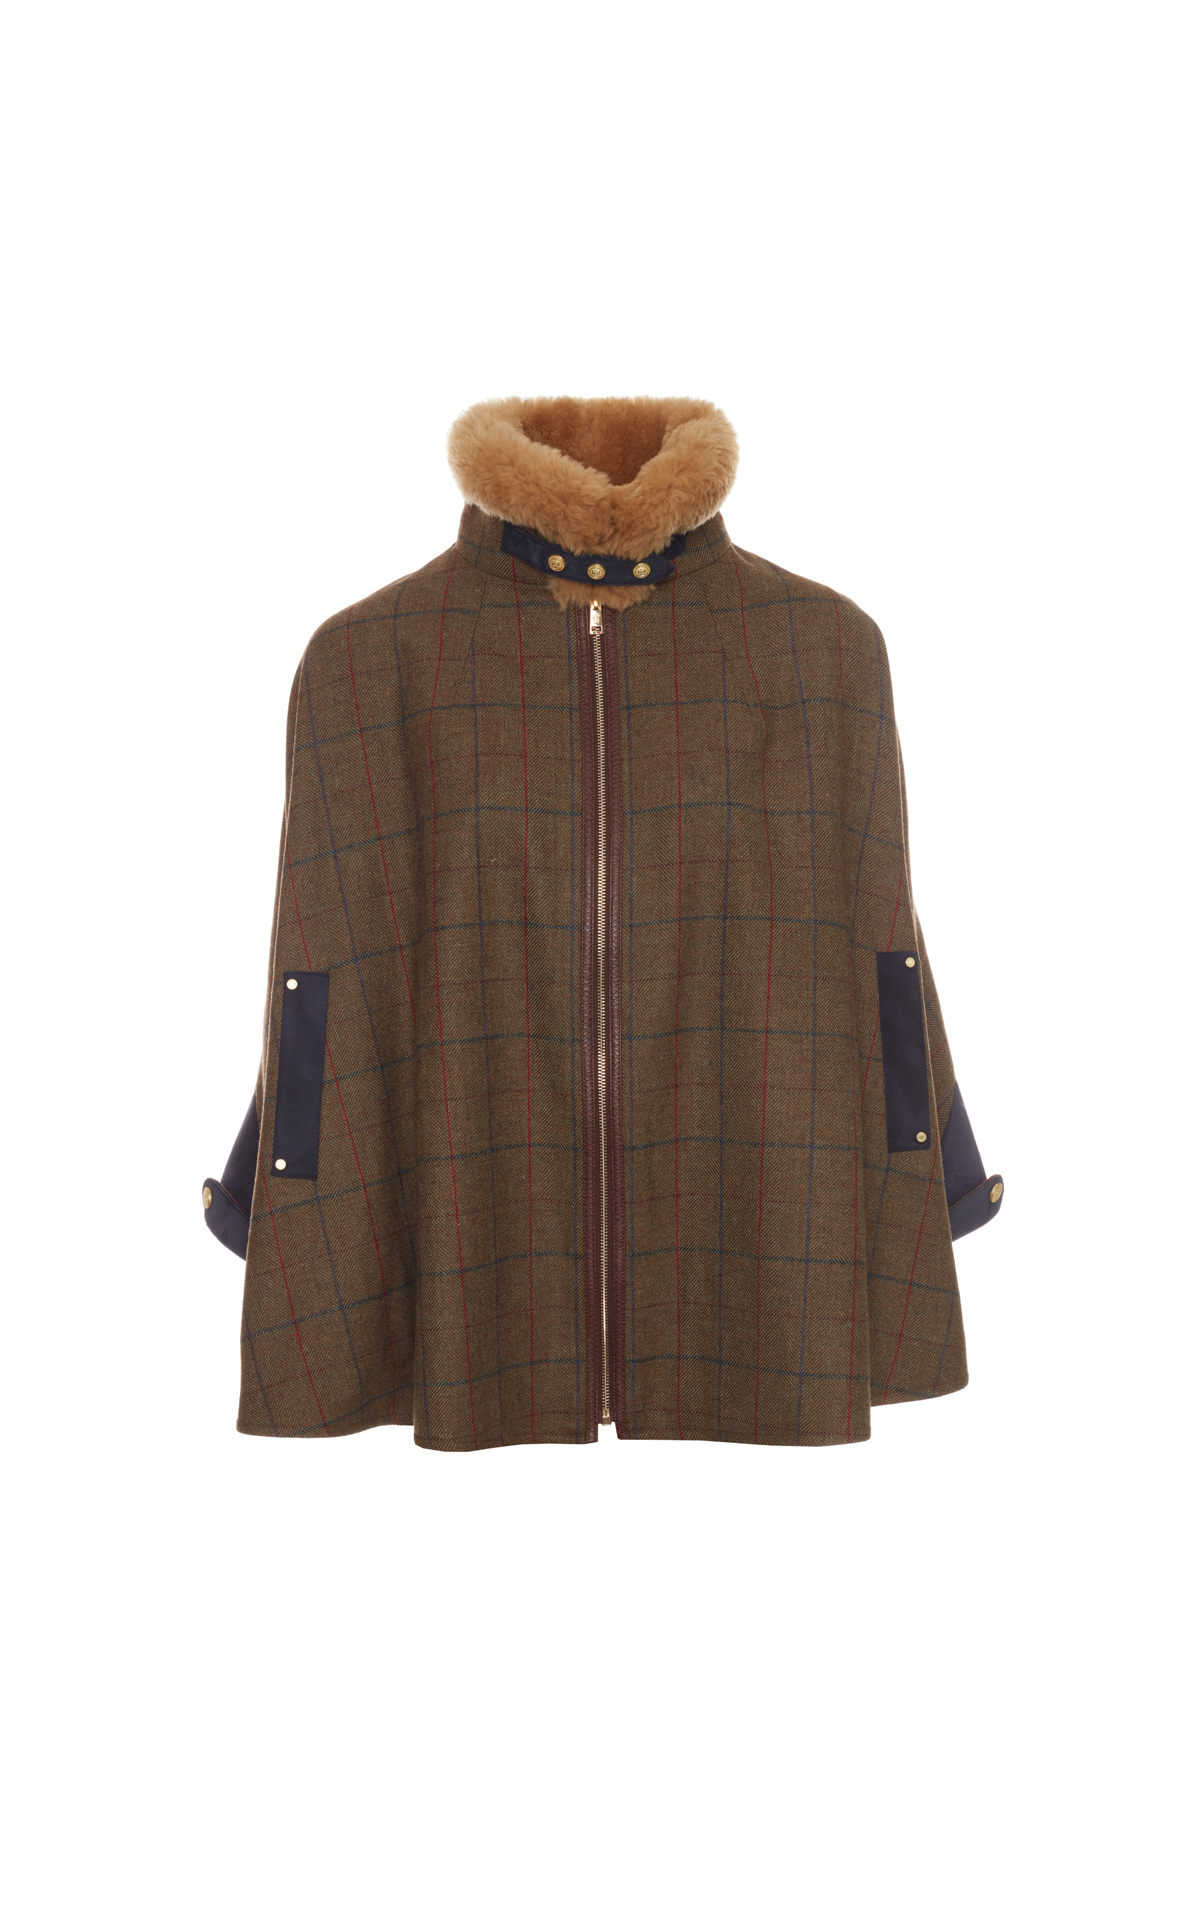 Holland & Cooper Chiltern cape from Bicester Village